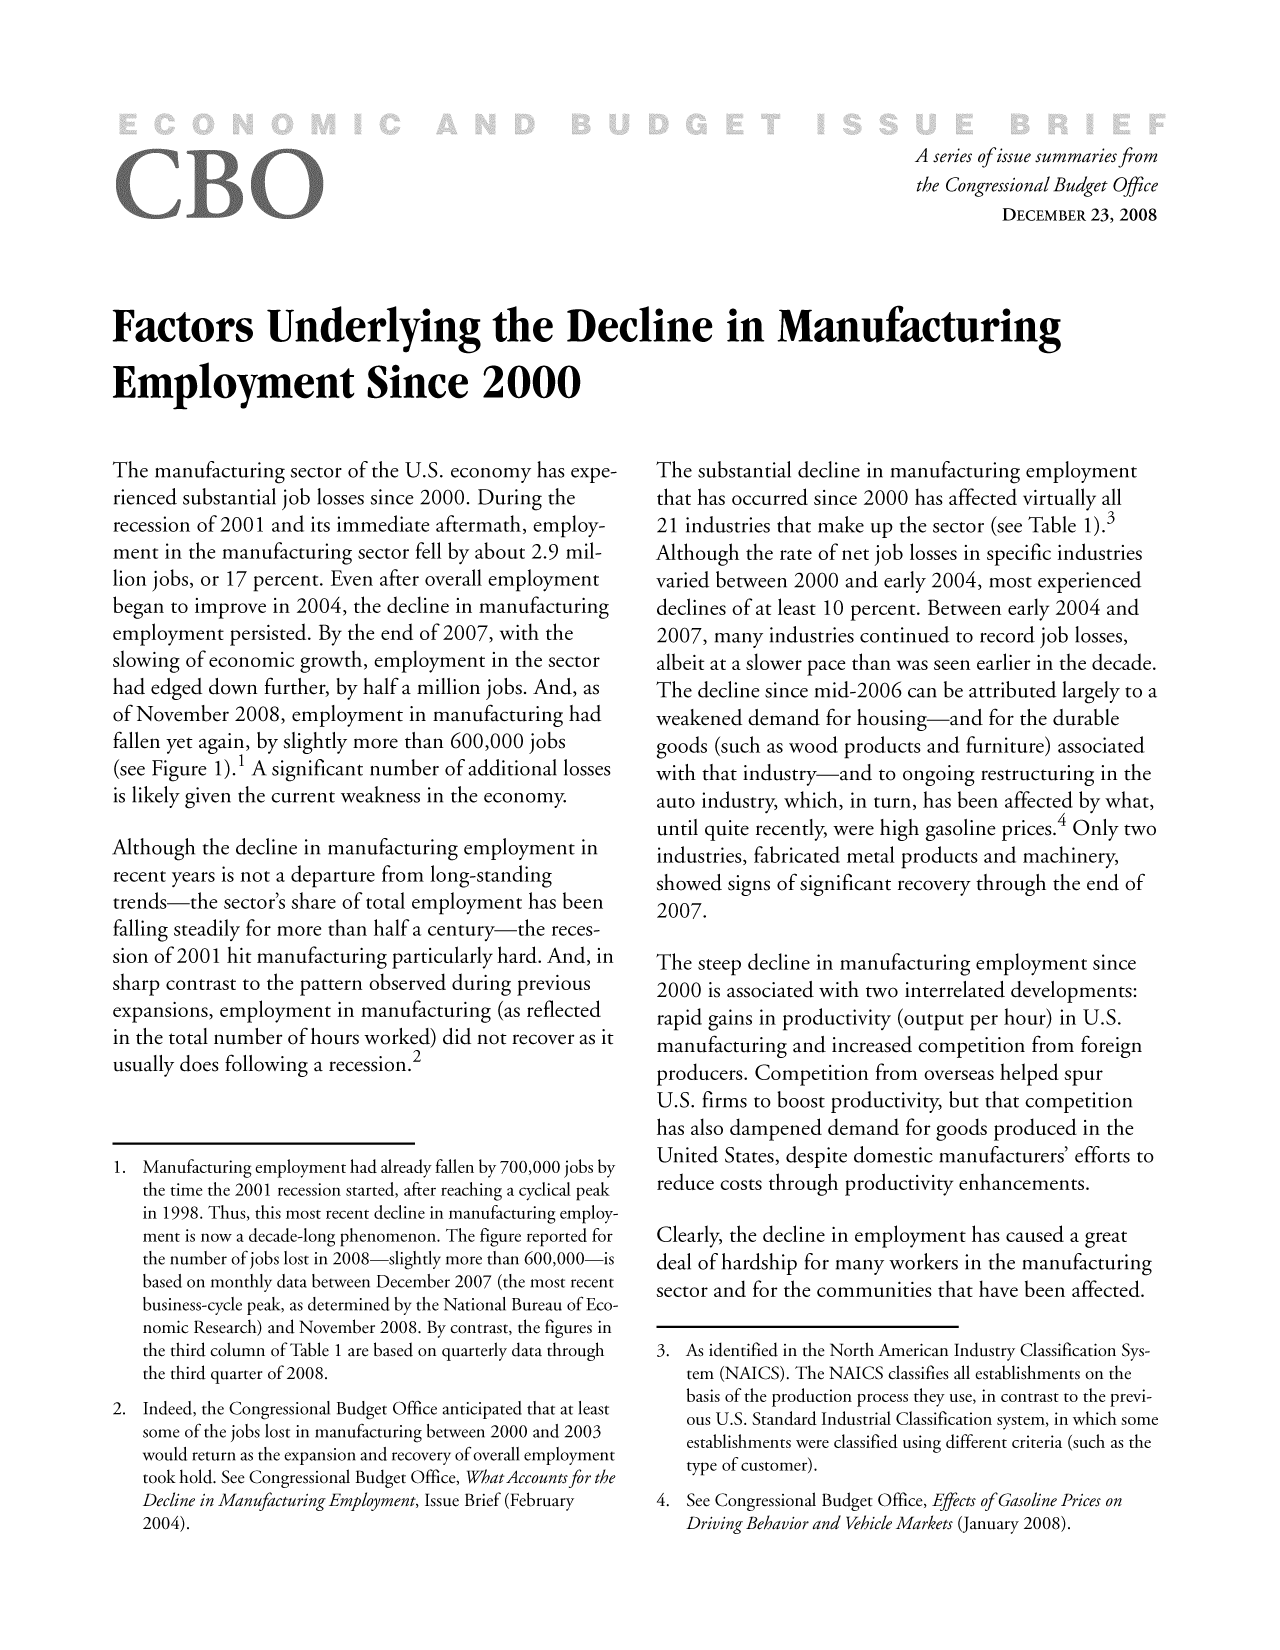 handle is hein.congrec/cbo9530 and id is 1 raw text is: A series ofissue summaries from
the Congressional Budget Office
DECEMBER 23, 2008
Factors Underlying the Decline in Manufacturing
Employment Since 2000

The manufacturing sector of the U.S. economy has expe-
rienced substantial job losses since 2000. During the
recession of 2001 and its immediate aftermath, employ-
ment in the manufacturing sector fell by about 2.9 mil-
lion jobs, or 17 percent. Even after overall employment
began to improve in 2004, the decline in manufacturing
employment persisted. By the end of 2007, with the
slowing of economic growth, employment in the sector
had edged down further, by half a million jobs. And, as
of November 2008, employment in manufacturing had
fallen yet again, by slightly more than 600,000 jobs
(see Figure 1). 1 A significant number of additional losses
is likely given the current weakness in the economy.
Although the decline in manufacturing employment in
recent years is not a departure from long-standing
trends-the sector's share of total employment has been
falling steadily for more than half a century-the reces-
sion of 2001 hit manufacturing particularly hard. And, in
sharp contrast to the pattern observed during previous
expansions, employment in manufacturing (as reflected
in the total number of hours worked) did not recover as it
usually does following a recession.2
1. Manufacturing employment had already fallen by 700,000 jobs by
the time the 2001 recession started, after reaching a cyclical peak
in 1998. Thus, this most recent decline in manufacturing employ-
ment is now a decade-long phenomenon. The figure reported for
the number of jobs lost in 2008-slightly more than 600,000-is
based on monthly data between December 2007 (the most recent
business-cycle peak, as determined by the National Bureau of Eco-
nomic Research) and November 2008. By contrast, the figures in
the third column of Table 1 are based on quarterly data through
the third quarter of 2008.
2. Indeed, the Congressional Budget Office anticipated that at least
some of the jobs lost in manufacturing between 2000 and 2003
would return as the expansion and recovery of overall employment
took hold. See Congressional Budget Office, WhatAccounts for the
Decline in Manufacturing Employment, Issue Brief (February
2004).

The substantial decline in manufacturing employment
that has occurred since 2000 has affected virtually all
21 industries that make up the sector (see Table 1).3
Although the rate of net job losses in specific industries
varied between 2000 and early 2004, most experienced
declines of at least 10 percent. Between early 2004 and
2007, many industries continued to record job losses,
albeit at a slower pace than was seen earlier in the decade.
The decline since mid-2006 can be attributed largely to a
weakened demand for housing-and for the durable
goods (such as wood products and furniture) associated
with that industry-and to ongoing restructuring in the
auto industry, which, in turn, has been affected by what,
until quite recently, were high gasoline prices.4 Only two
industries, fabricated metal products and machinery,
showed signs of significant recovery through the end of
2007.
The steep decline in manufacturing employment since
2000 is associated with two interrelated developments:
rapid gains in productivity (output per hour) in U.S.
manufacturing and increased competition from foreign
producers. Competition from overseas helped spur
U.S. firms to boost productivity, but that competition
has also dampened demand for goods produced in the
United States, despite domestic manufacturers' efforts to
reduce costs through productivity enhancements.
Clearly, the decline in employment has caused a great
deal of hardship for many workers in the manufacturing
sector and for the communities that have been affected.
3. As identified in the North American Industry Classification Sys-
tem (NAICS). The NAICS classifies all establishments on the
basis of the production process they use, in contrast to the previ-
ous U.S. Standard Industrial Classification system, in which some
establishments were classified using different criteria (such as the
type of customer).
4. See Congressional Budget Office, Effects of Gasoline Prices on
Driving Behavior and Vehicle Markets (January 2008).


